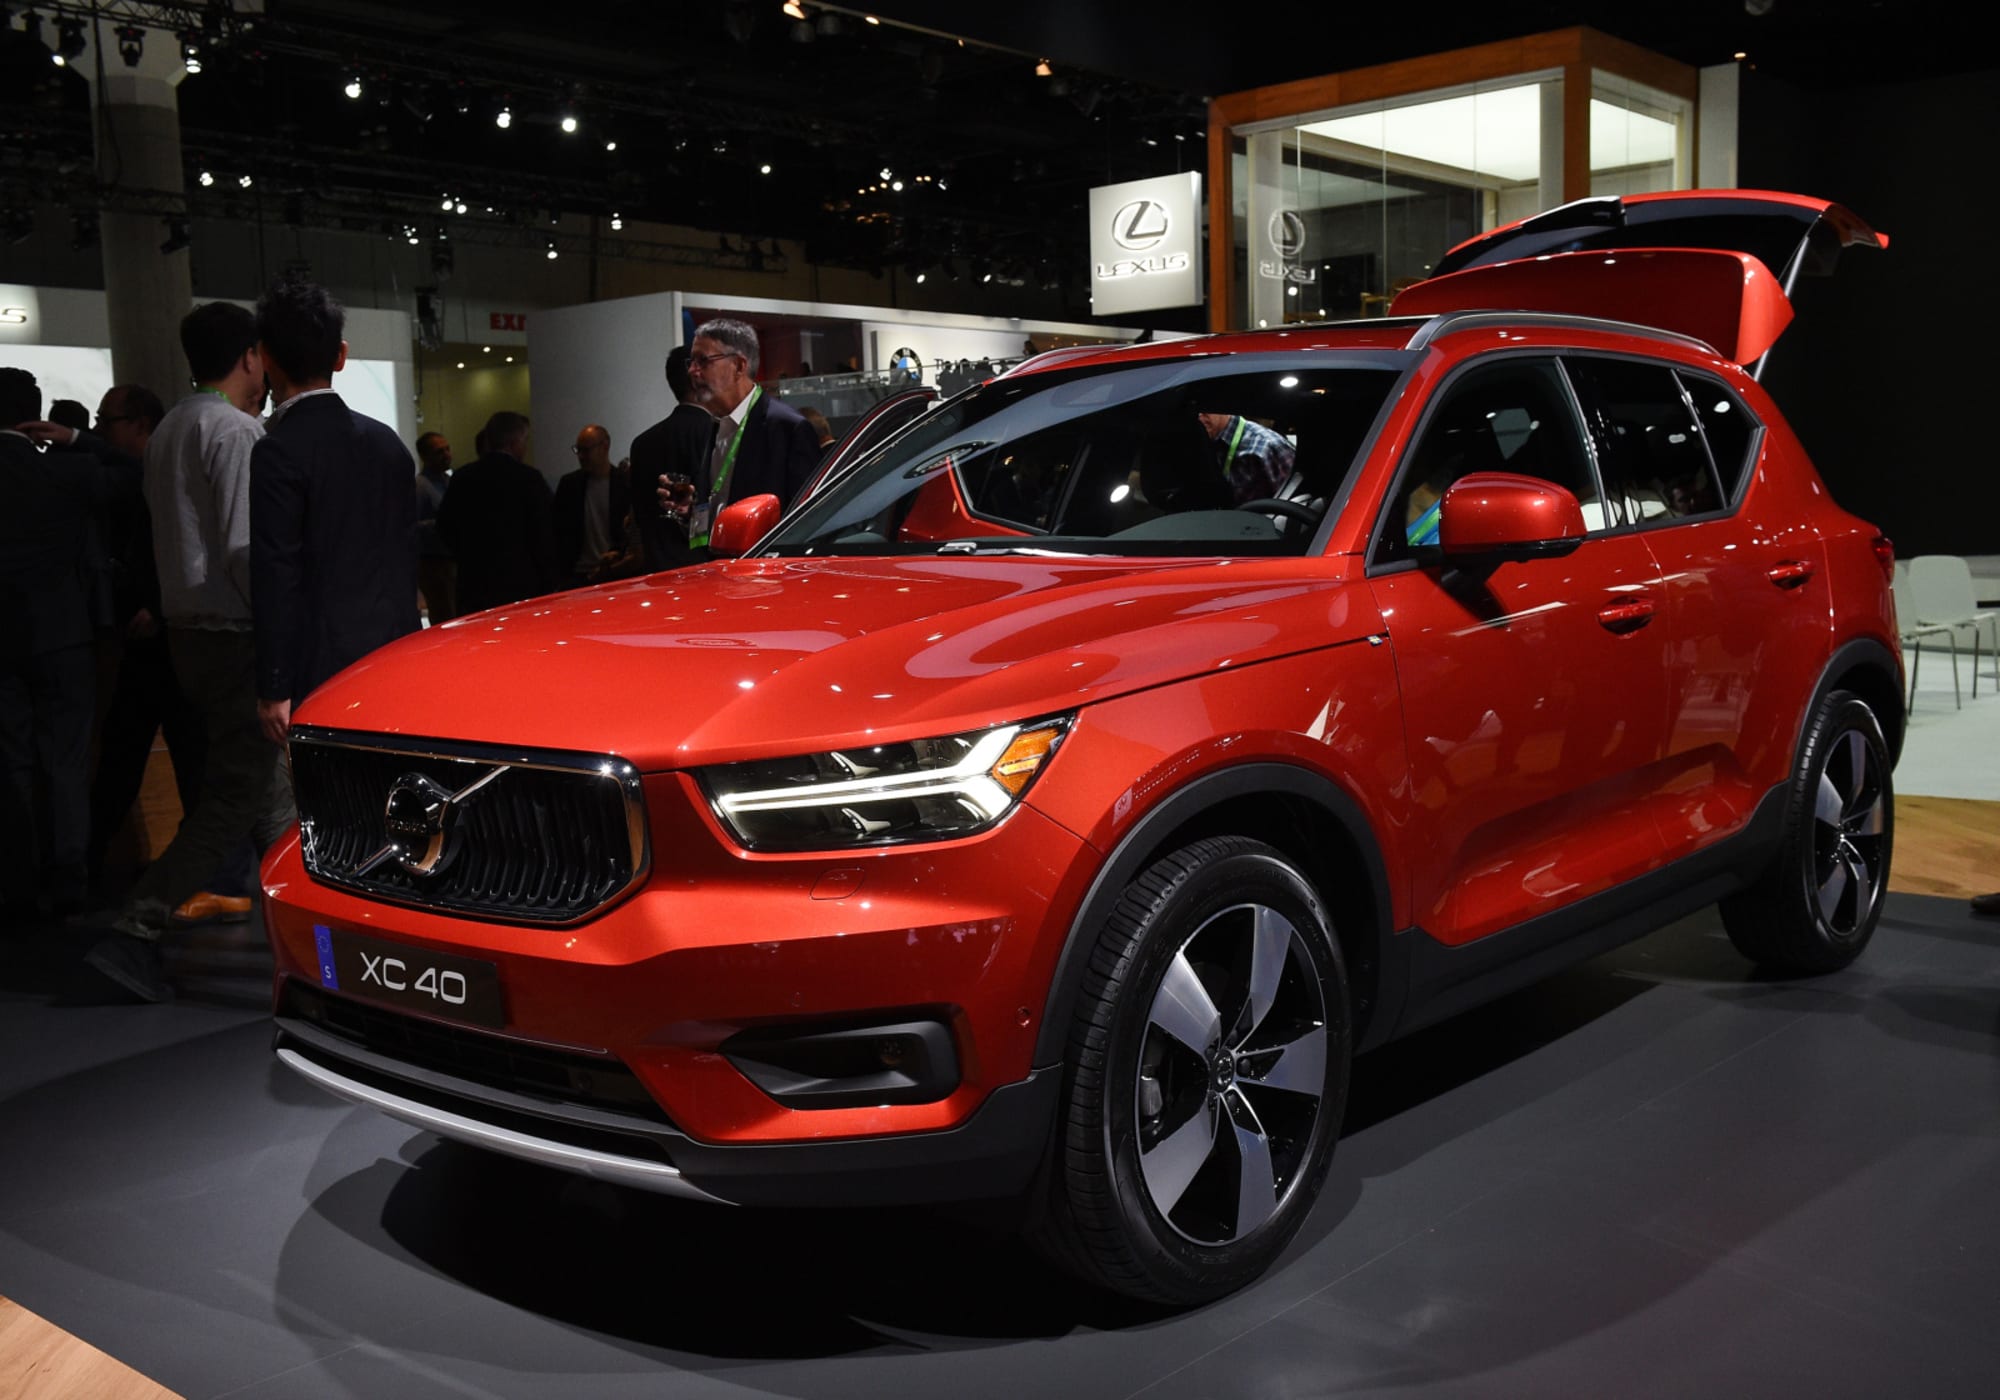 volvo-xc40-is-unveiled-as-the-brand-s-first-electric-car